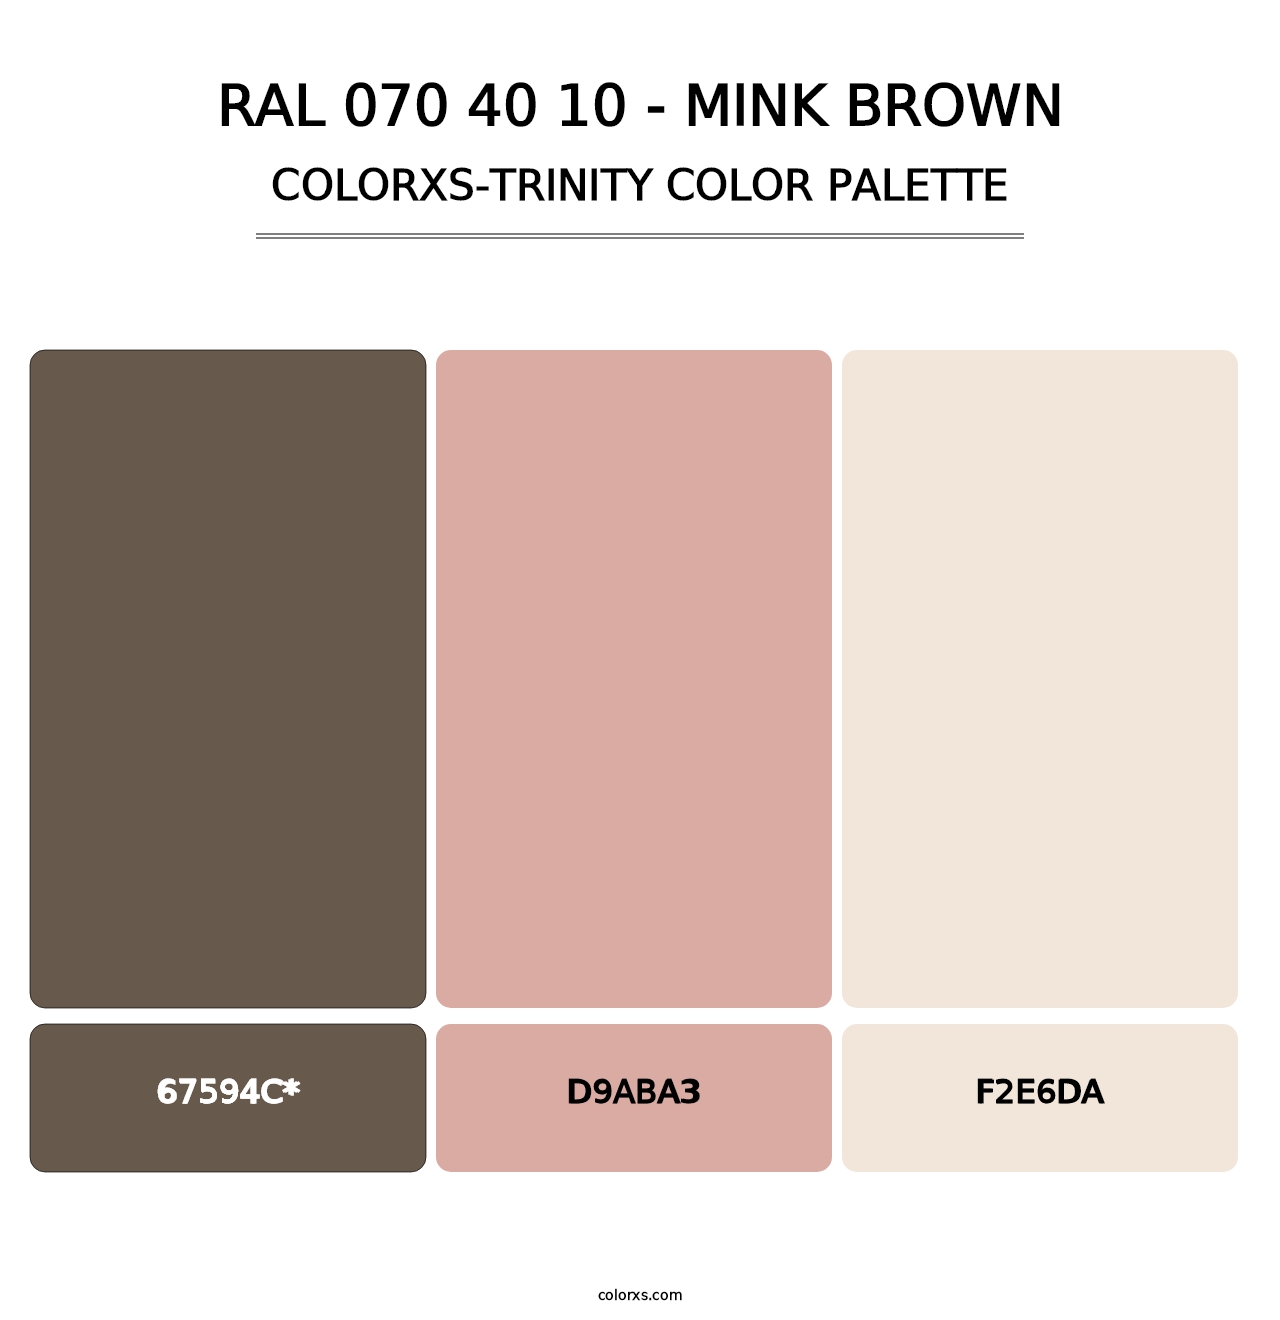 RAL 070 40 10 - Mink Brown - Colorxs Trinity Palette